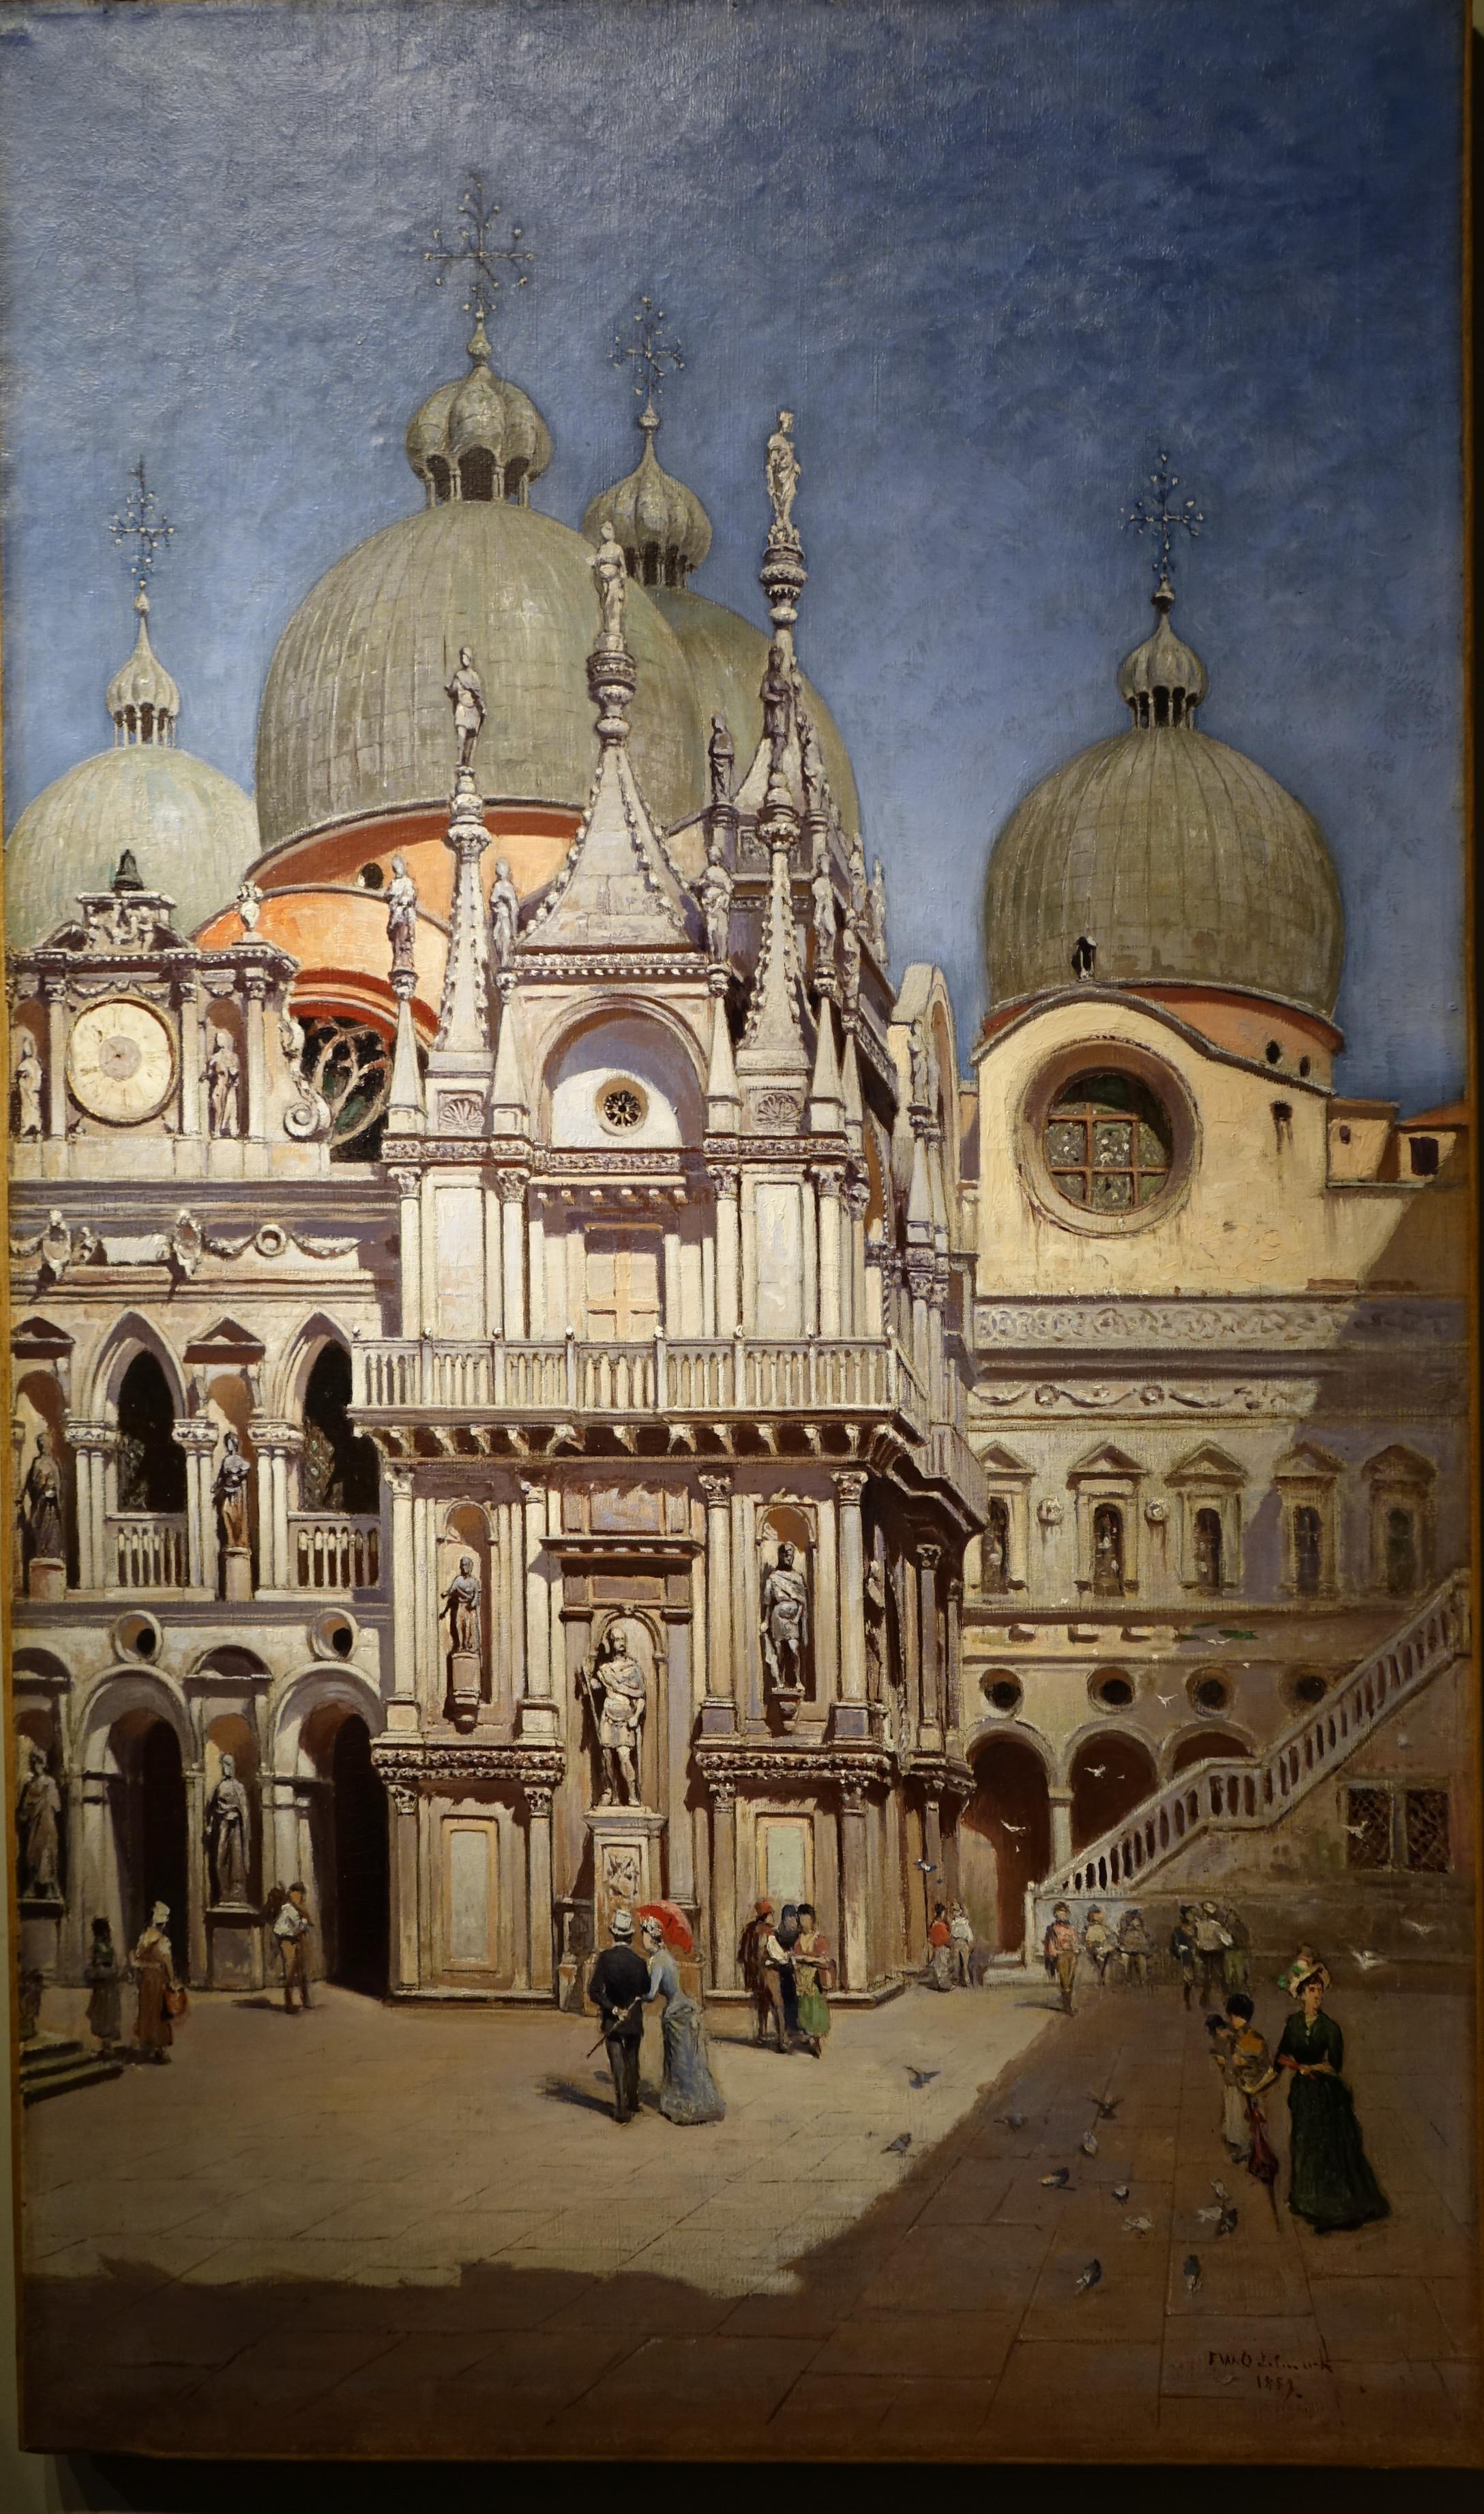 Oil on canvas representing the inner courtyard of the Doges Palace in Venice, in 1889.
Swedish School, bears the signature of Frans Wilhelm ODELMARK and the date 1889.
He studied at the Royal Academy of Arts in Stockholm and after that in Düsseldorf